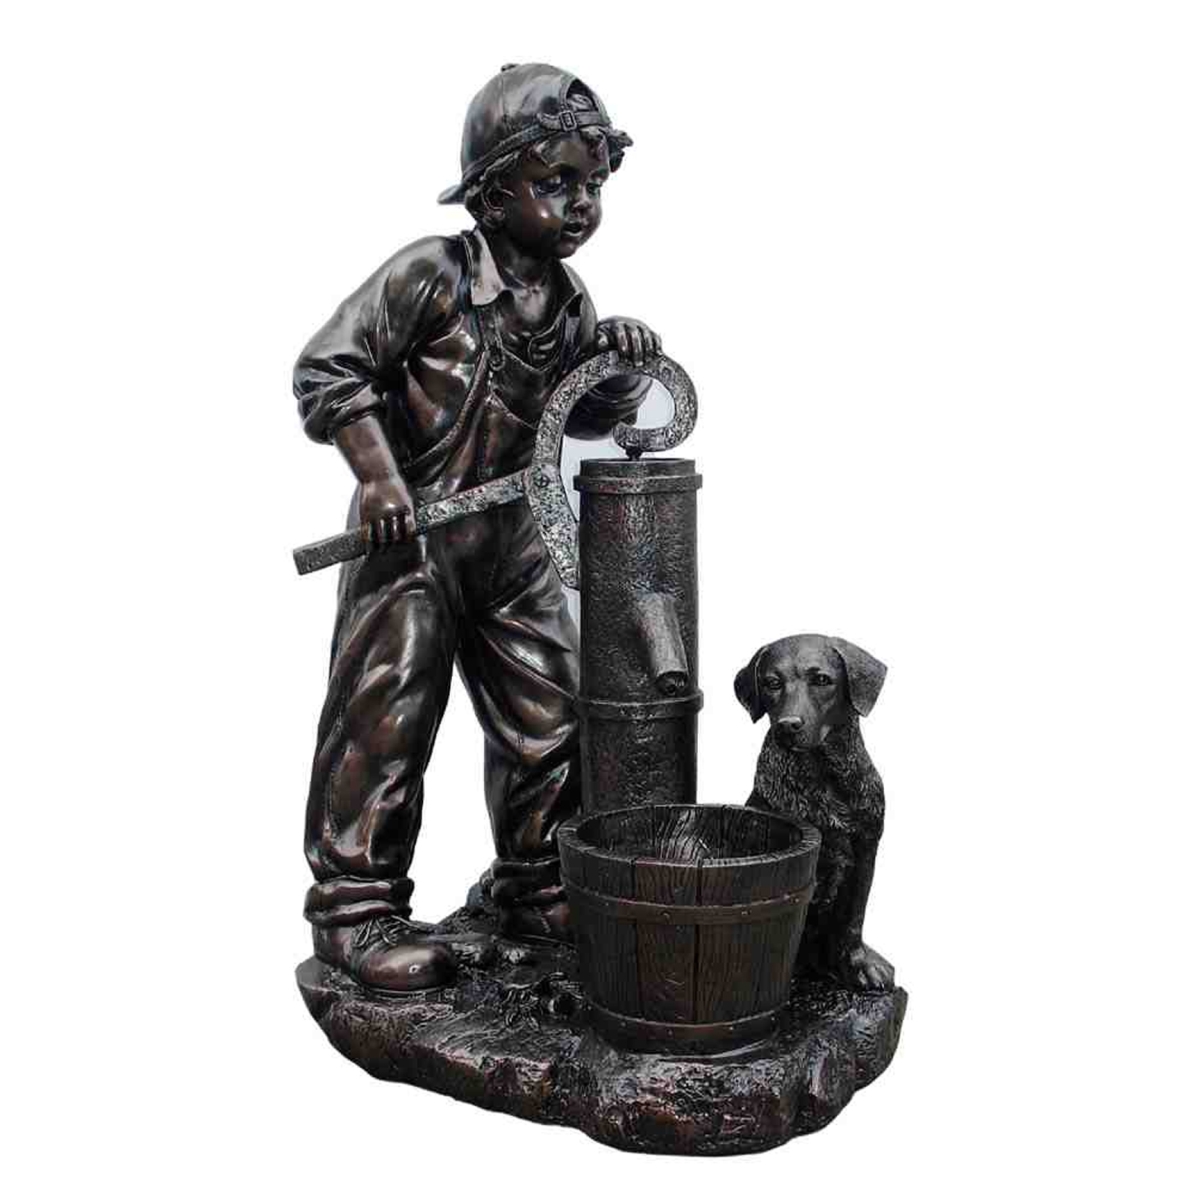 12005879 Boy Pumping Water Fountain, Multicolor - 39.5 X 22 X 17.75 In.